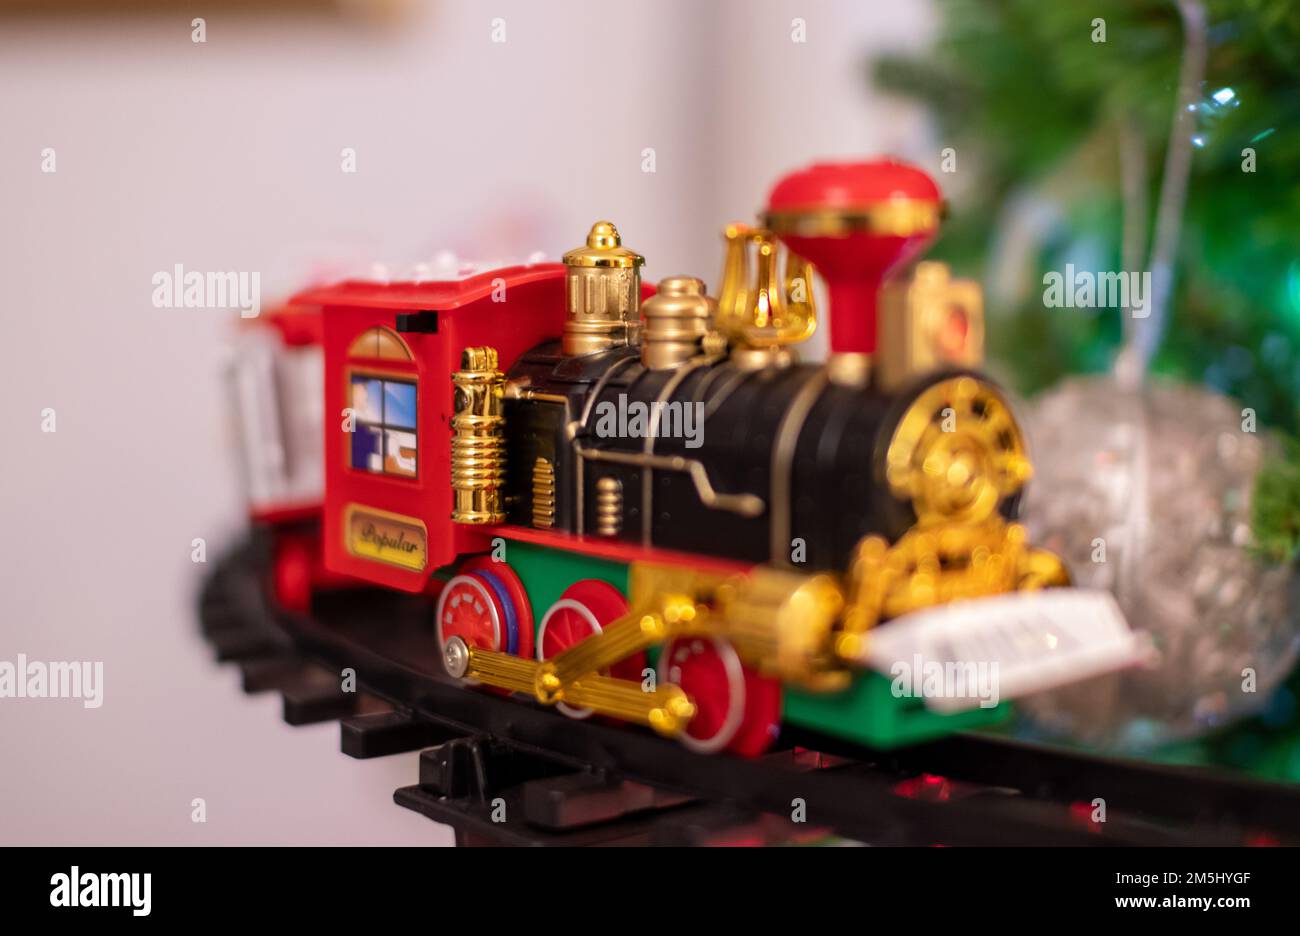 Christmas tree, a detail of the decoration. Santa's train, lights and colours. Stock Photo